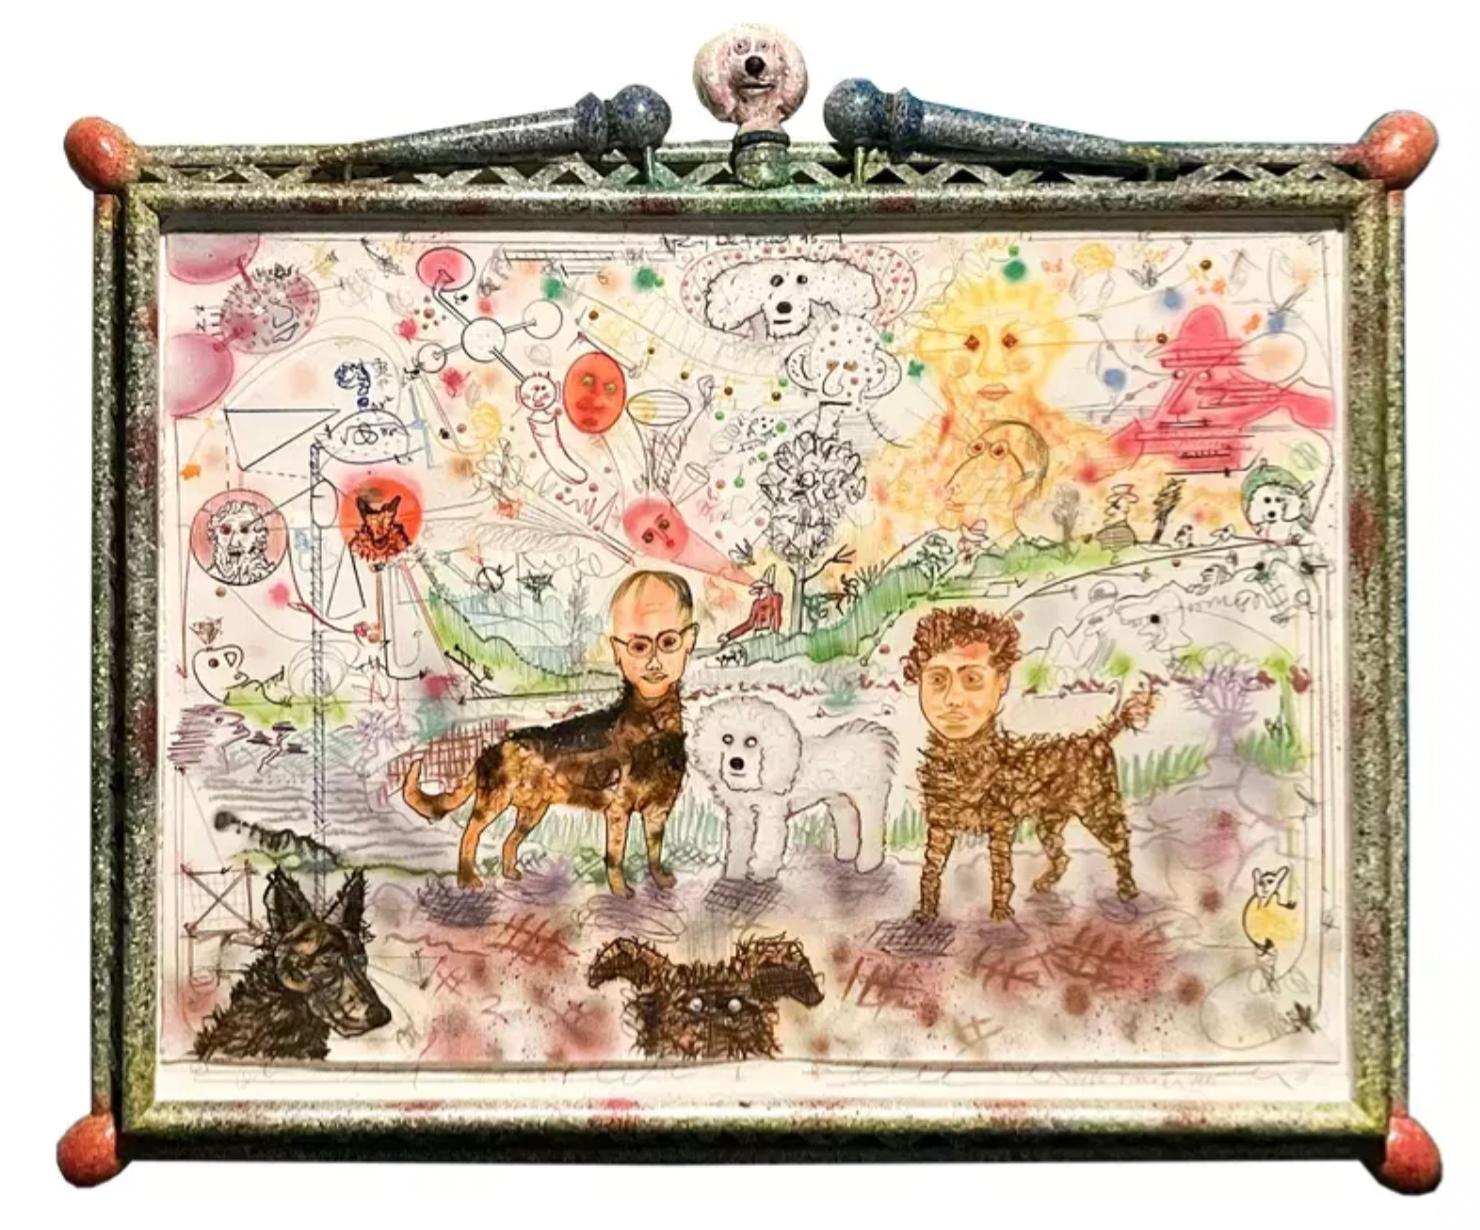 Taylor Family - Folk Art Painting by Roy De Forest